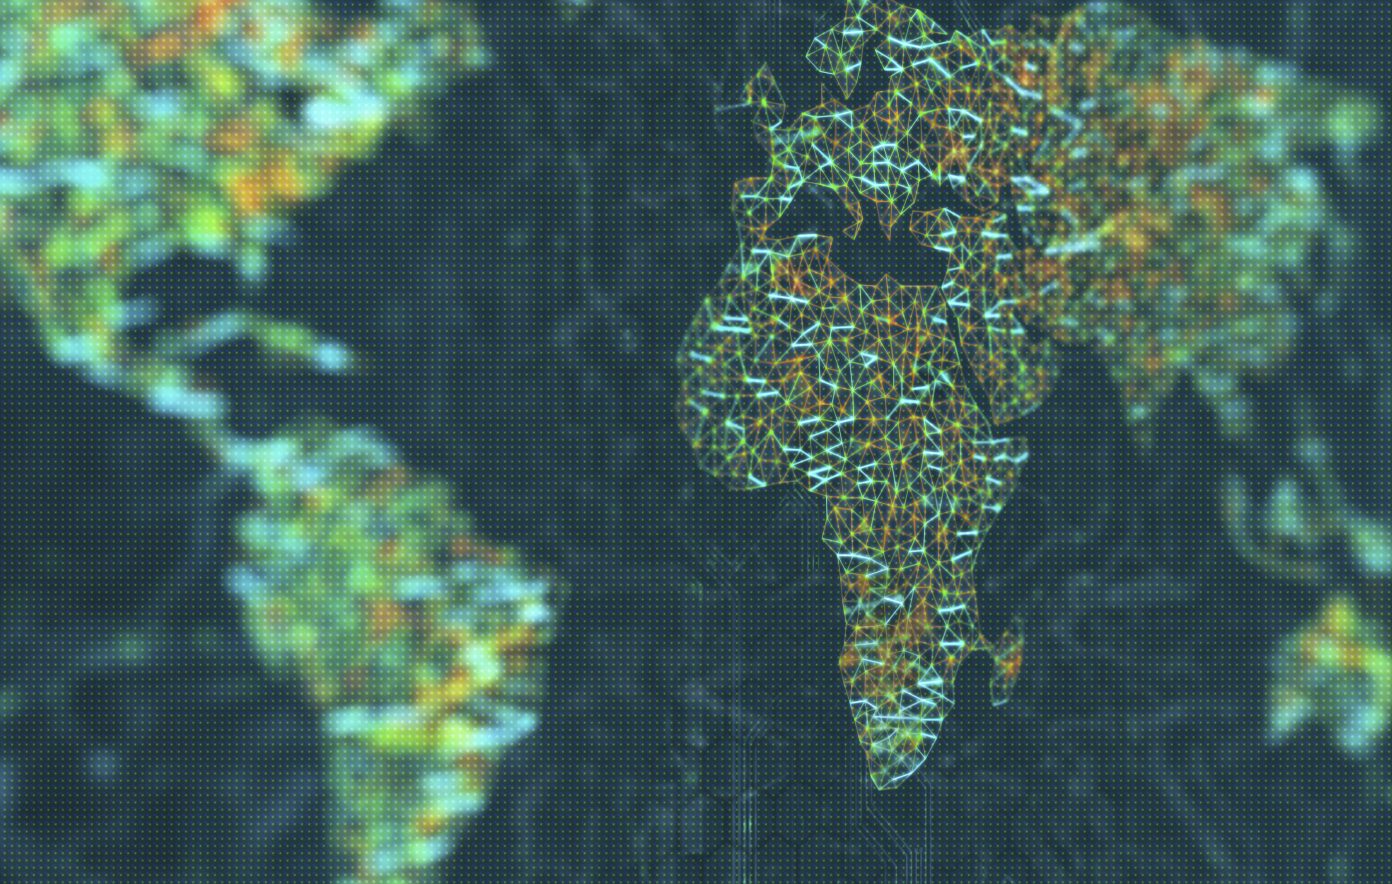 The proposed Three Million African Genomes project will take place across Africa.